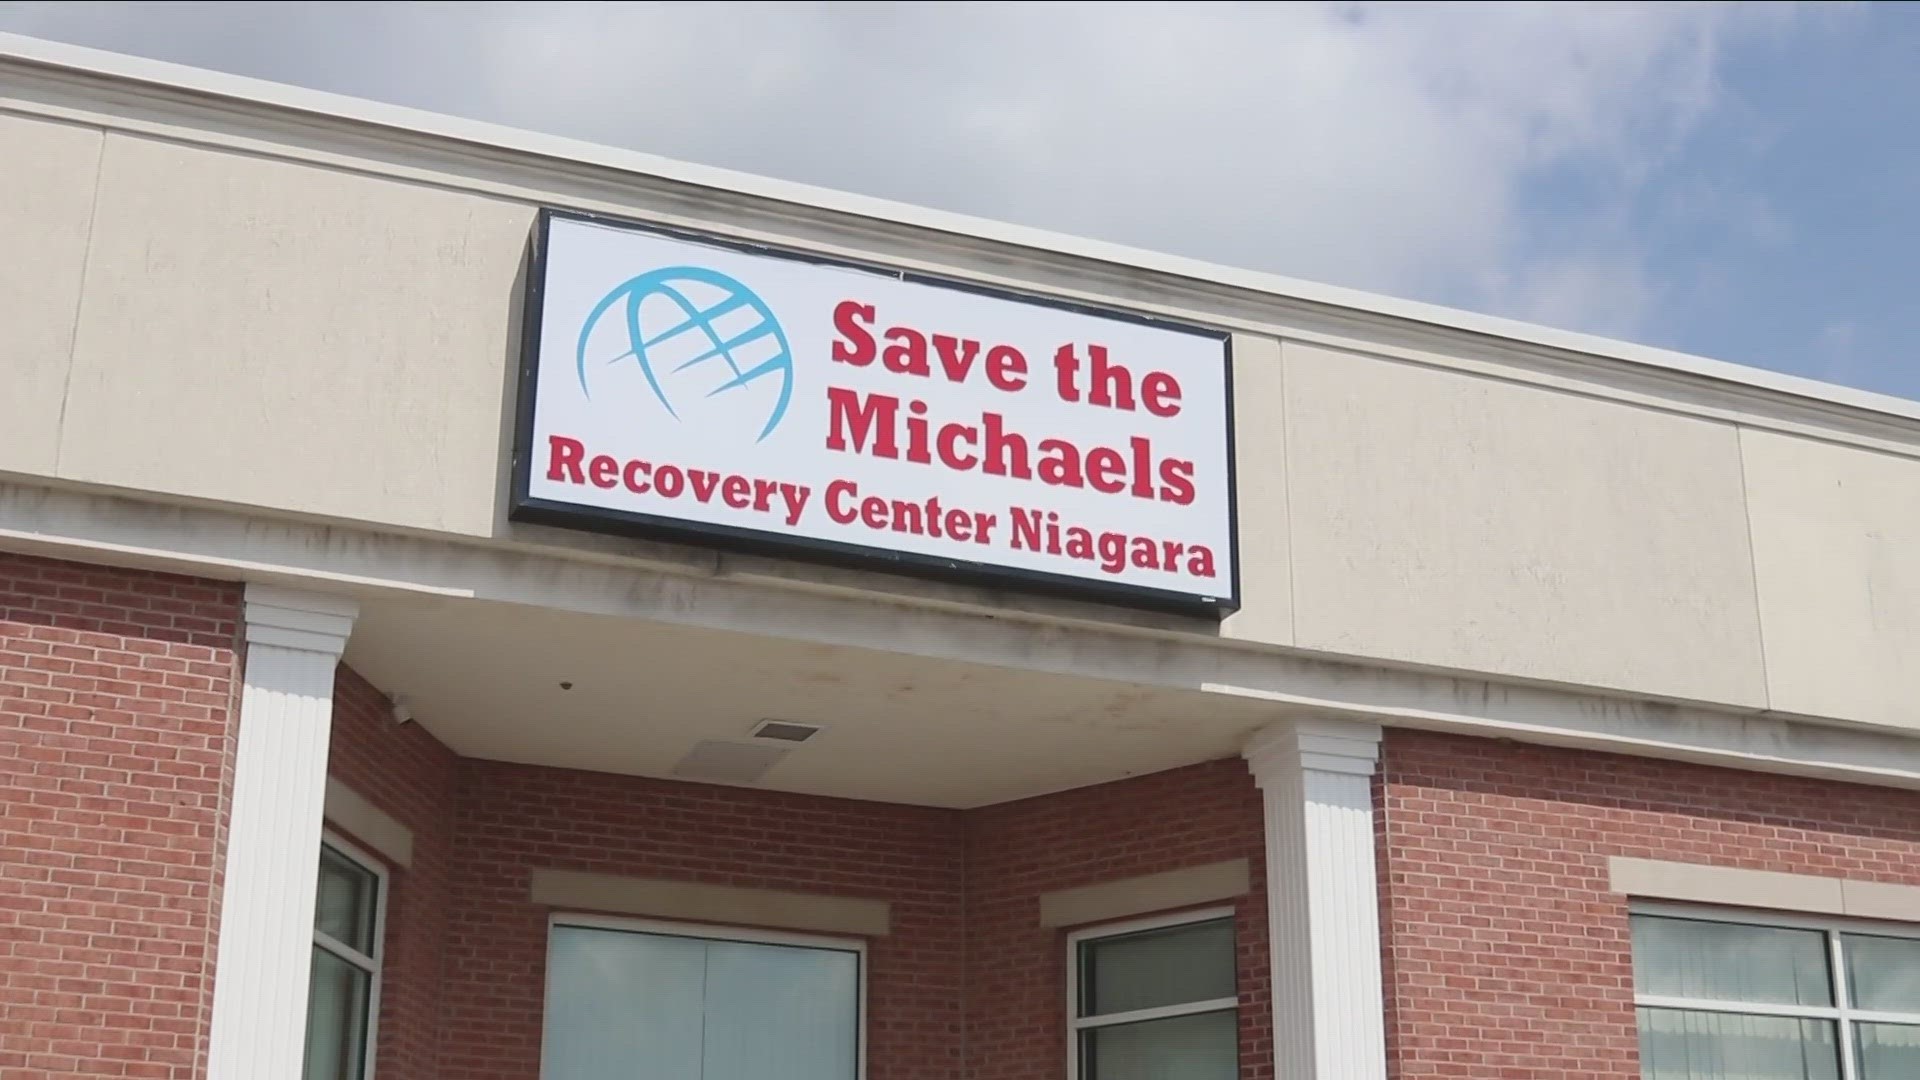 Save The Michaels says they've seen a significant increase in people utilizing their drop-in center in the city of Lockport, but funding is lacking.